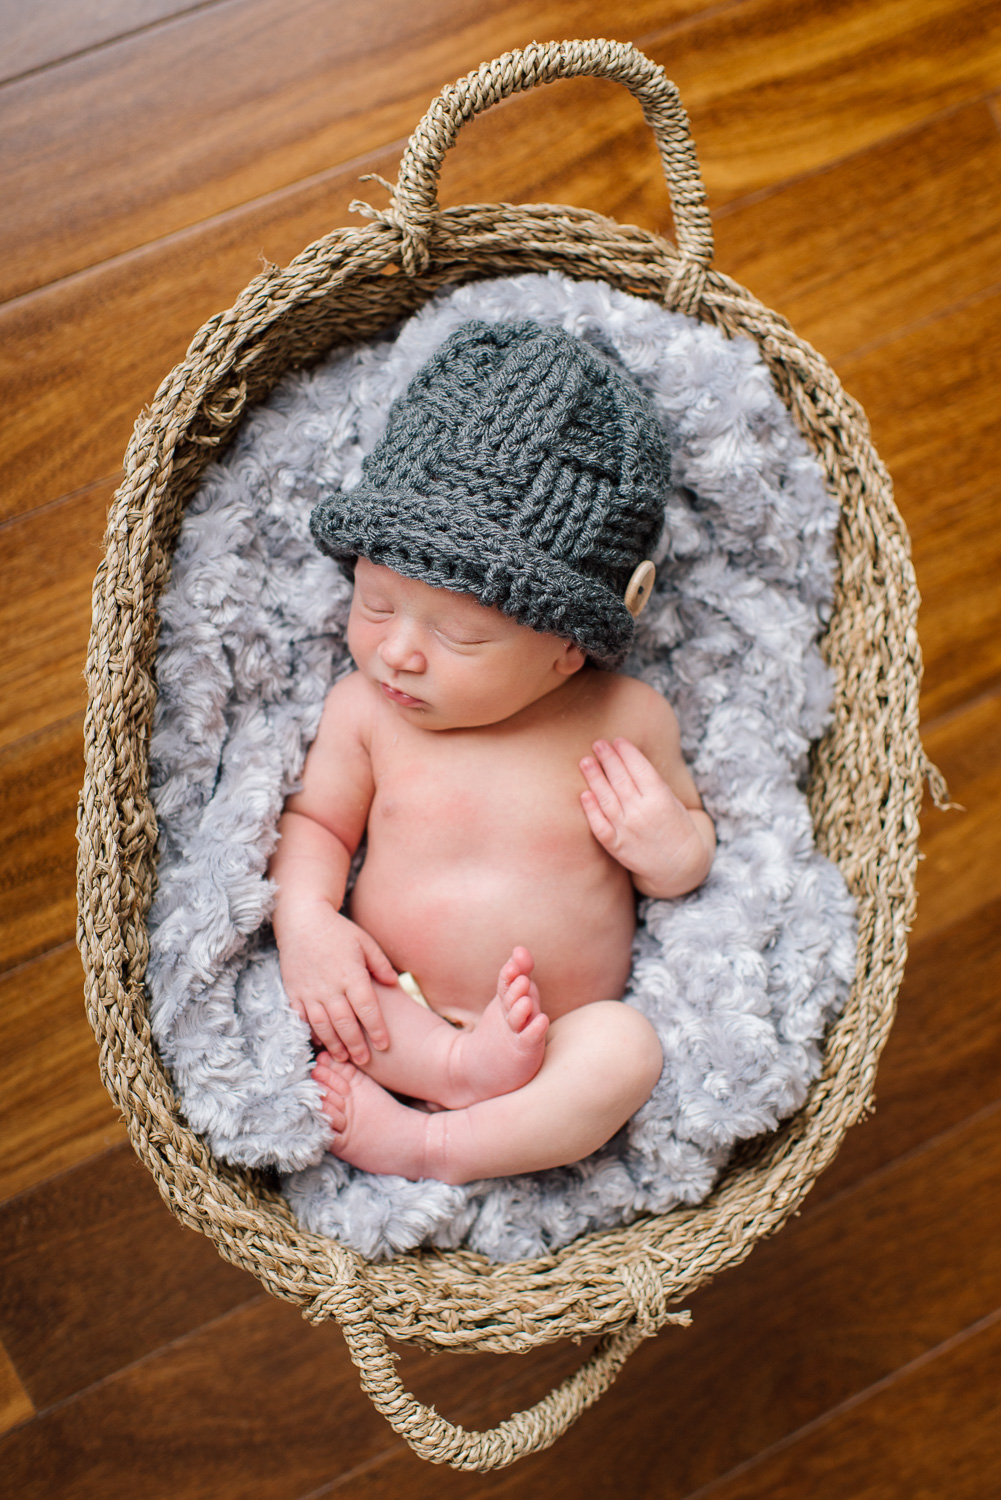 photograph of a newborn baby in a basket (Copy)